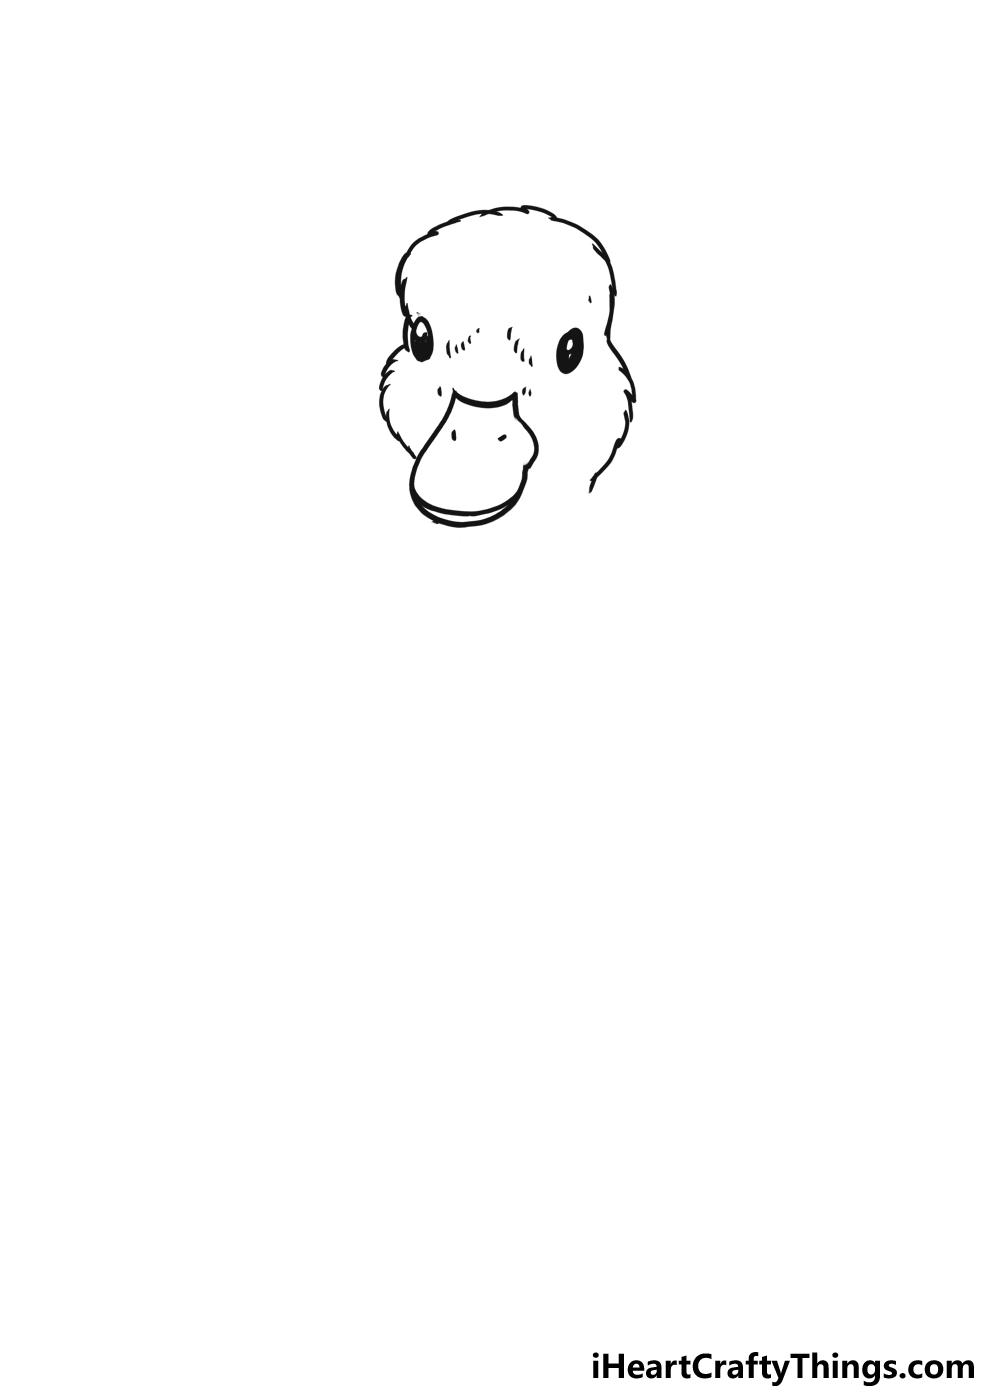 How to Draw A Cute Duckling step 2